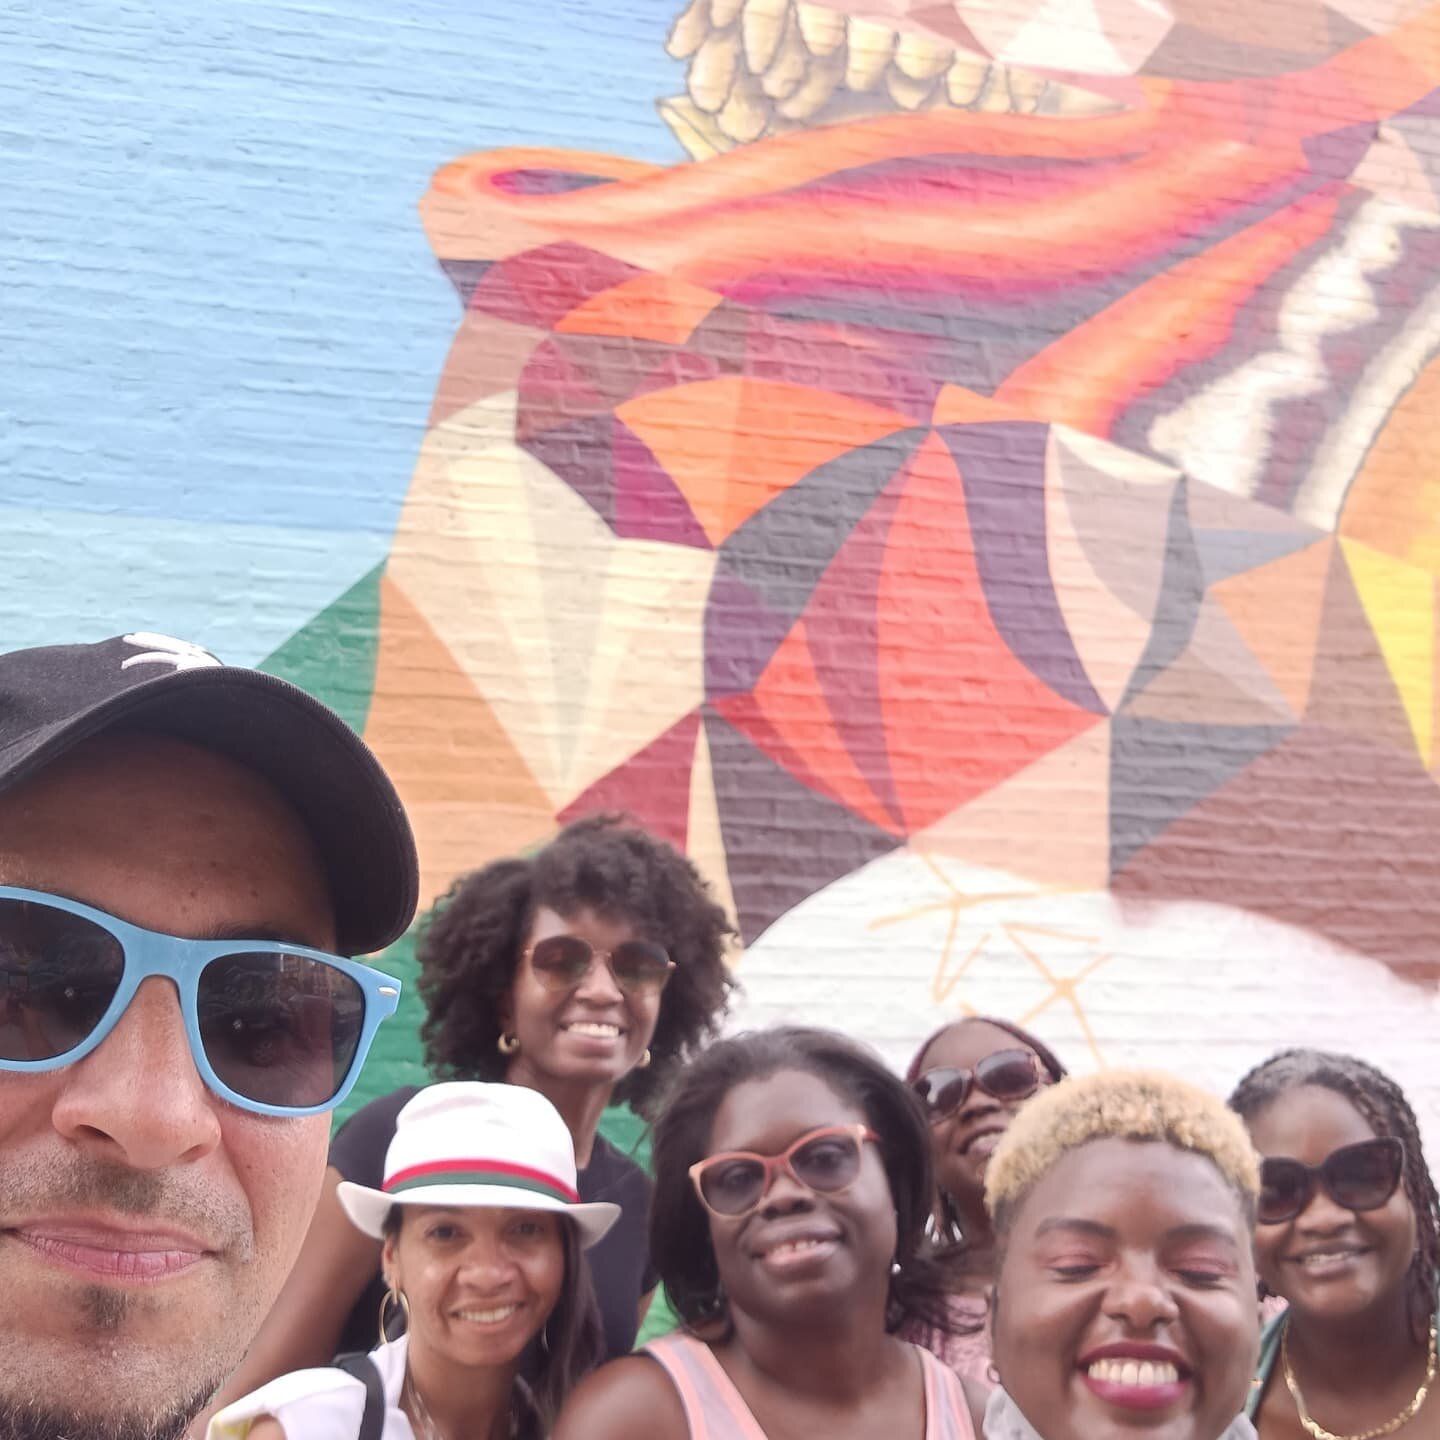 Thank you to the ladies of @investedconsultantfirm for coming on a tour of the murals! 

We'll have free tours on October 17th. More details coming soon! 

Mural in progress by @mauriciopaints